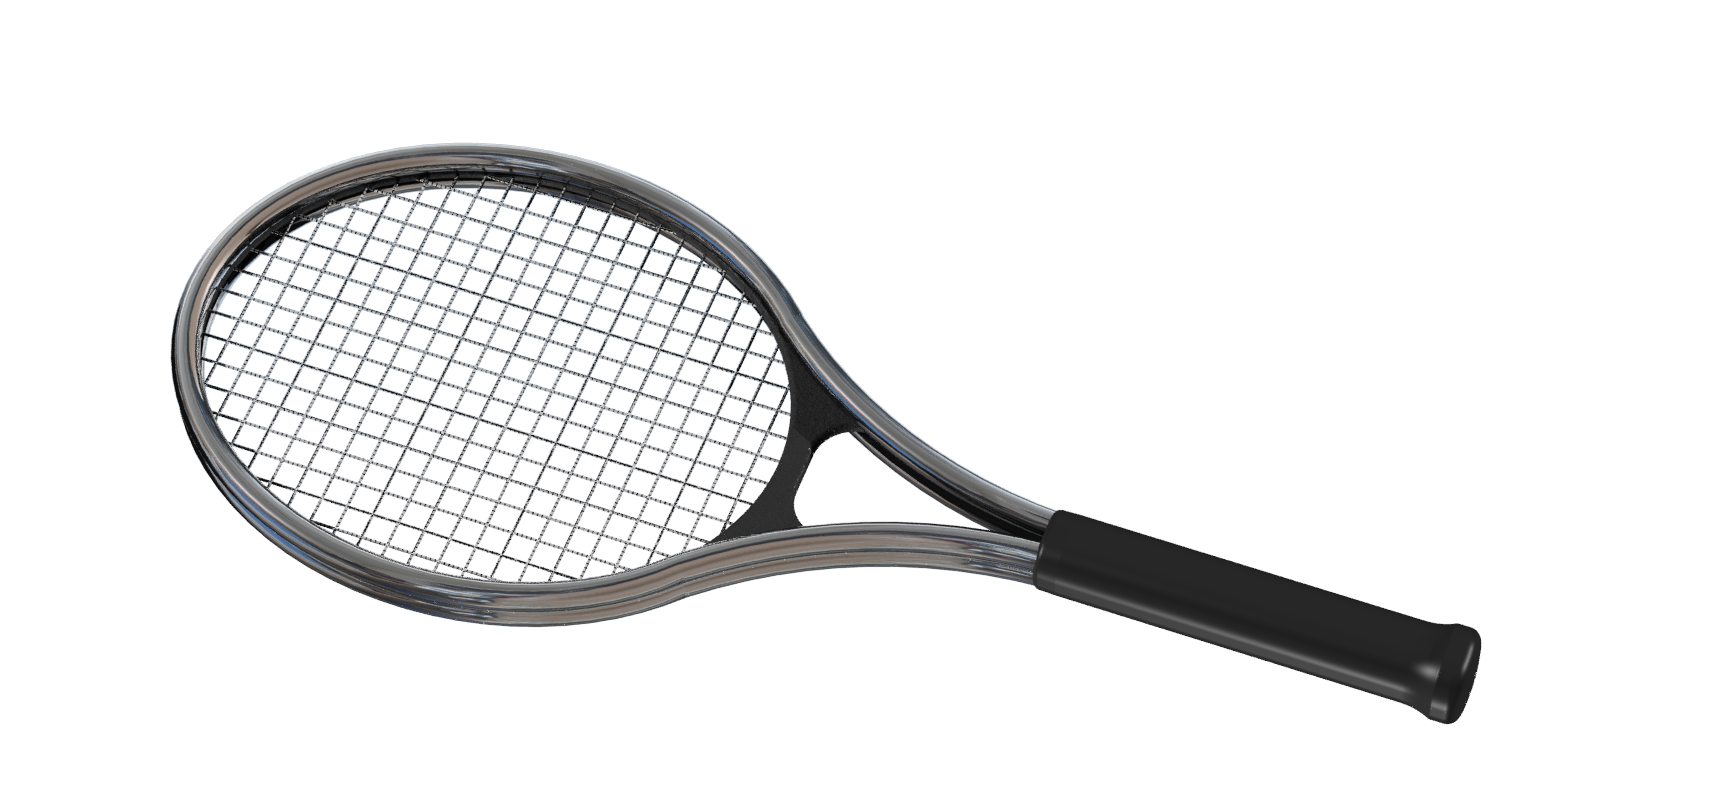 Tennis PNG images free download, tennis ball racket PNG.